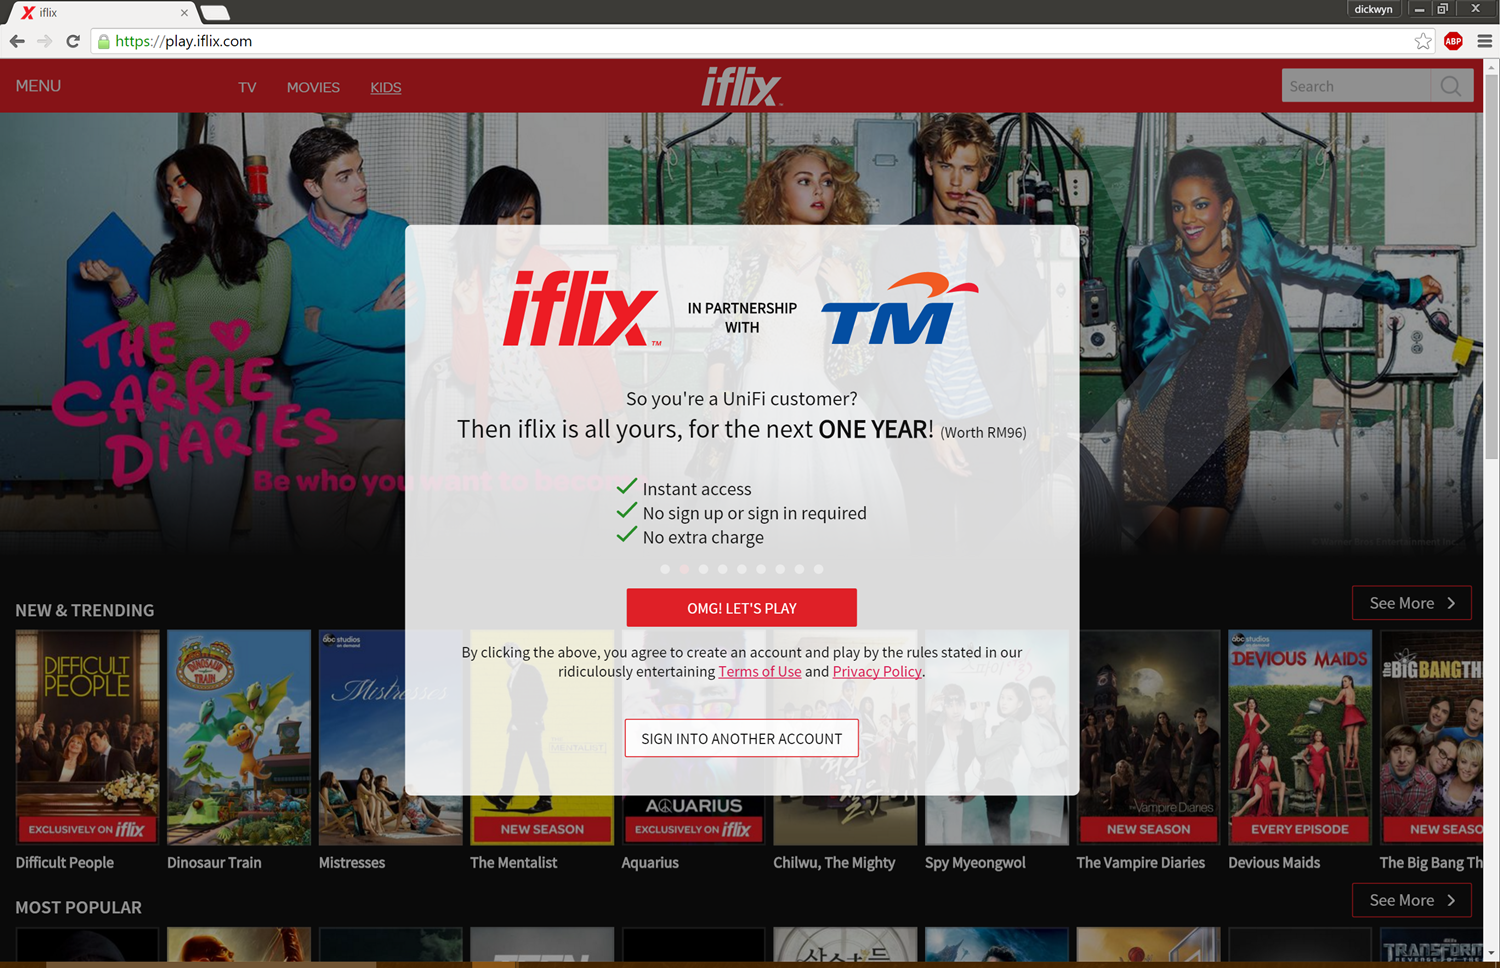 Iflix Is Now Offering Tm Unifi Customers A Free 12 Month Subscription Of Iflix Worth Rm 96 The Technology Of Today Malaysia